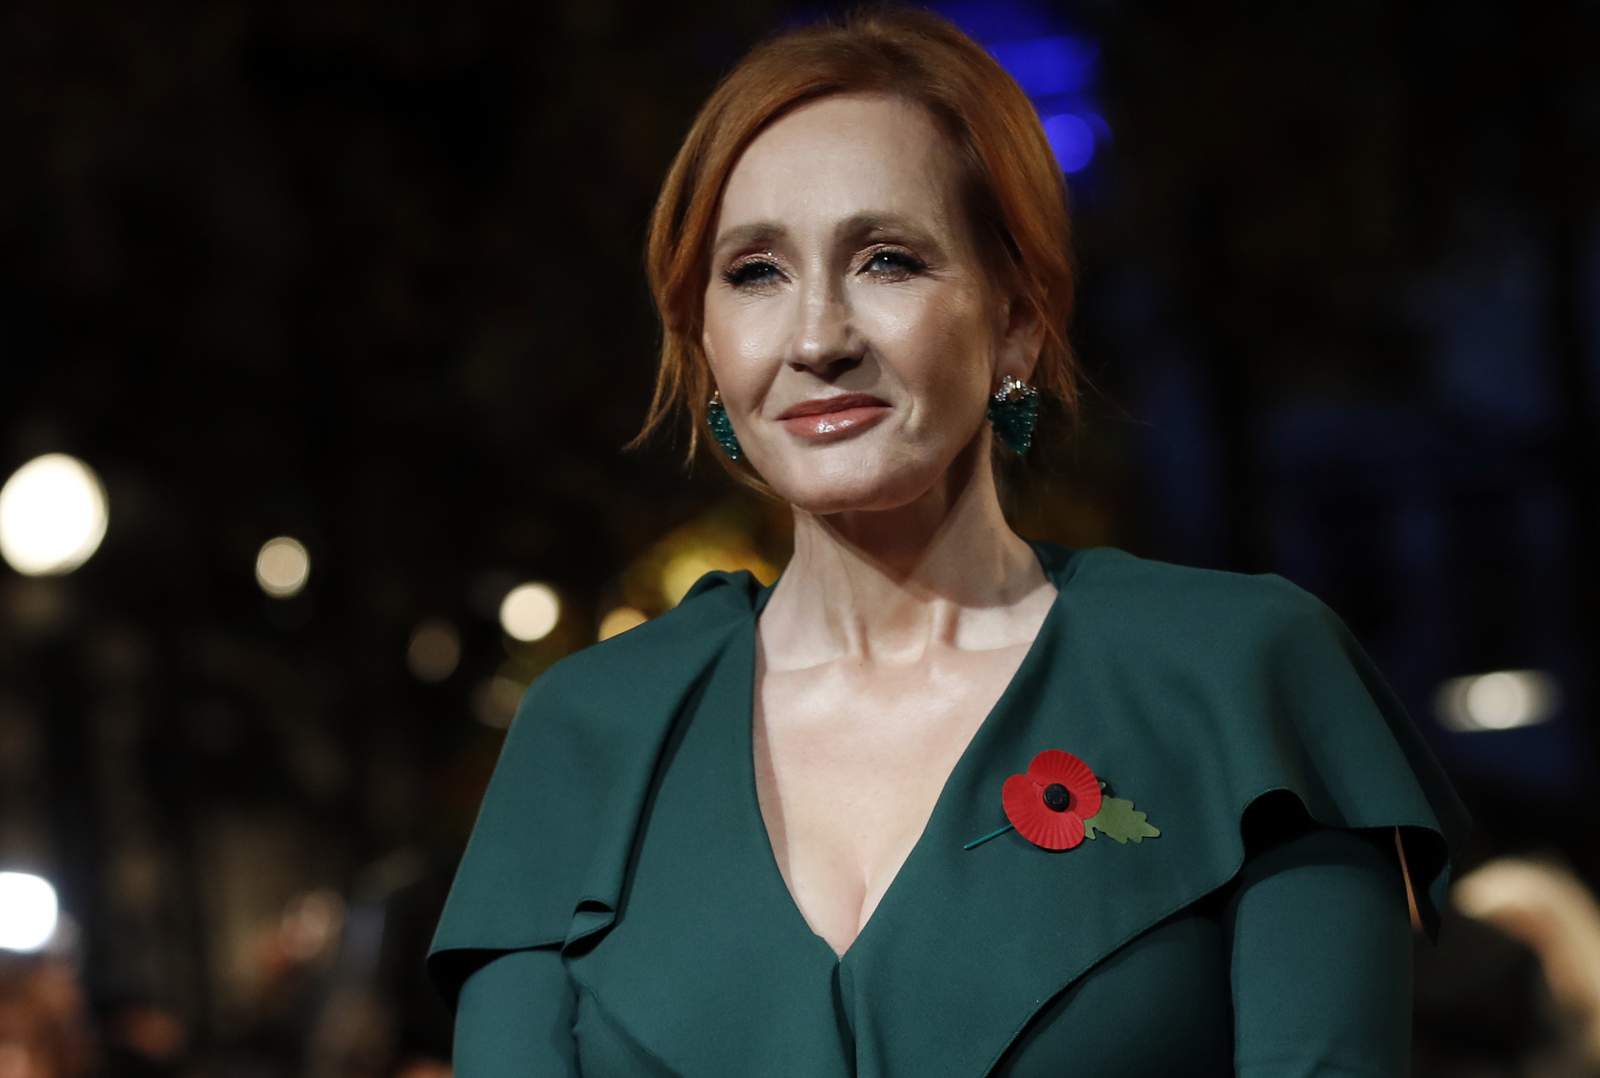 JK Rowling returns award from group linked to Kennedy family